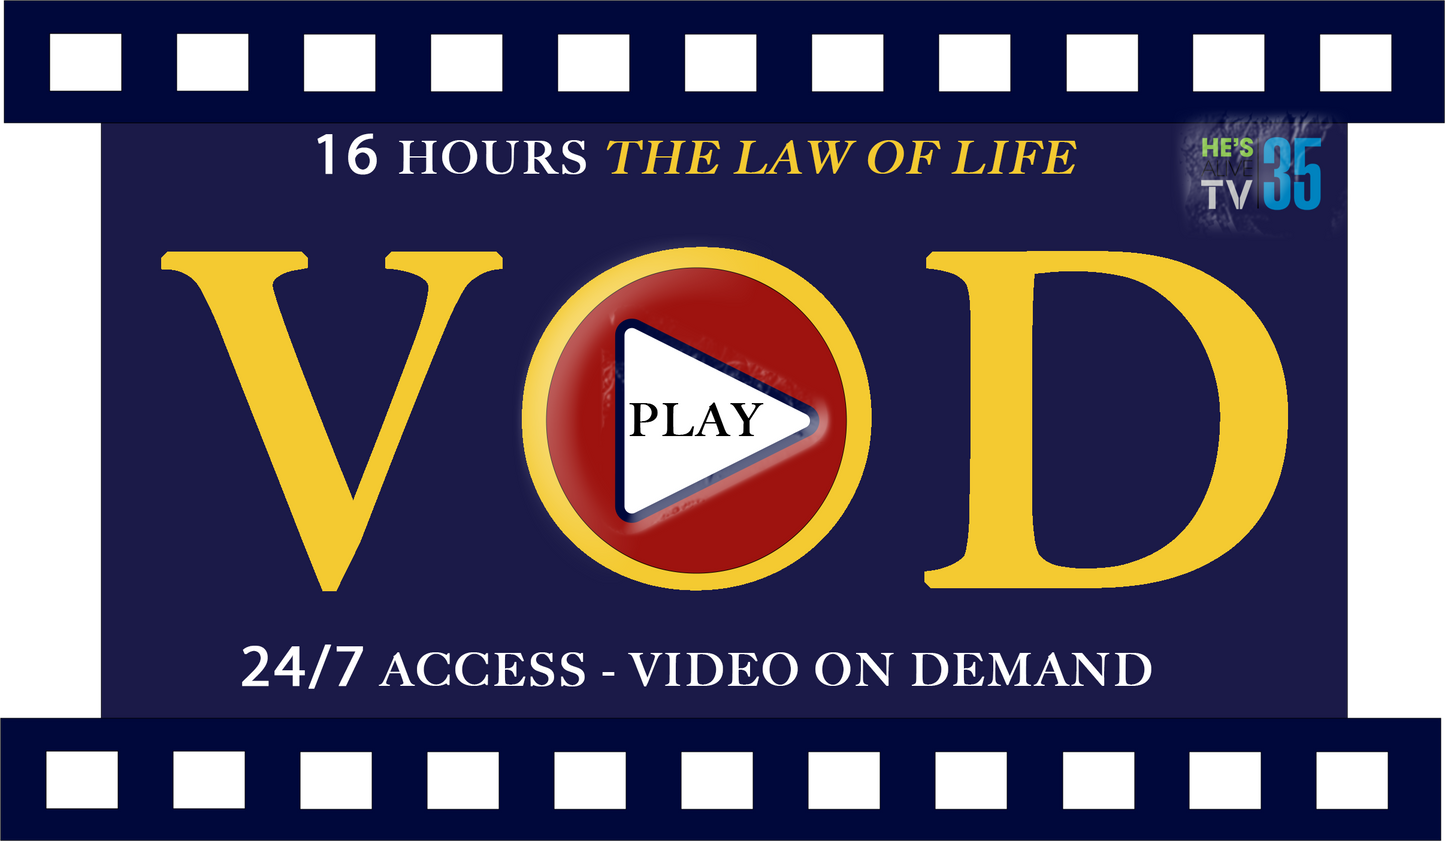 The Law of Life Video Series 16 hours of Video Over the Internet Viewing Plus The Law of Life Book and Workbook